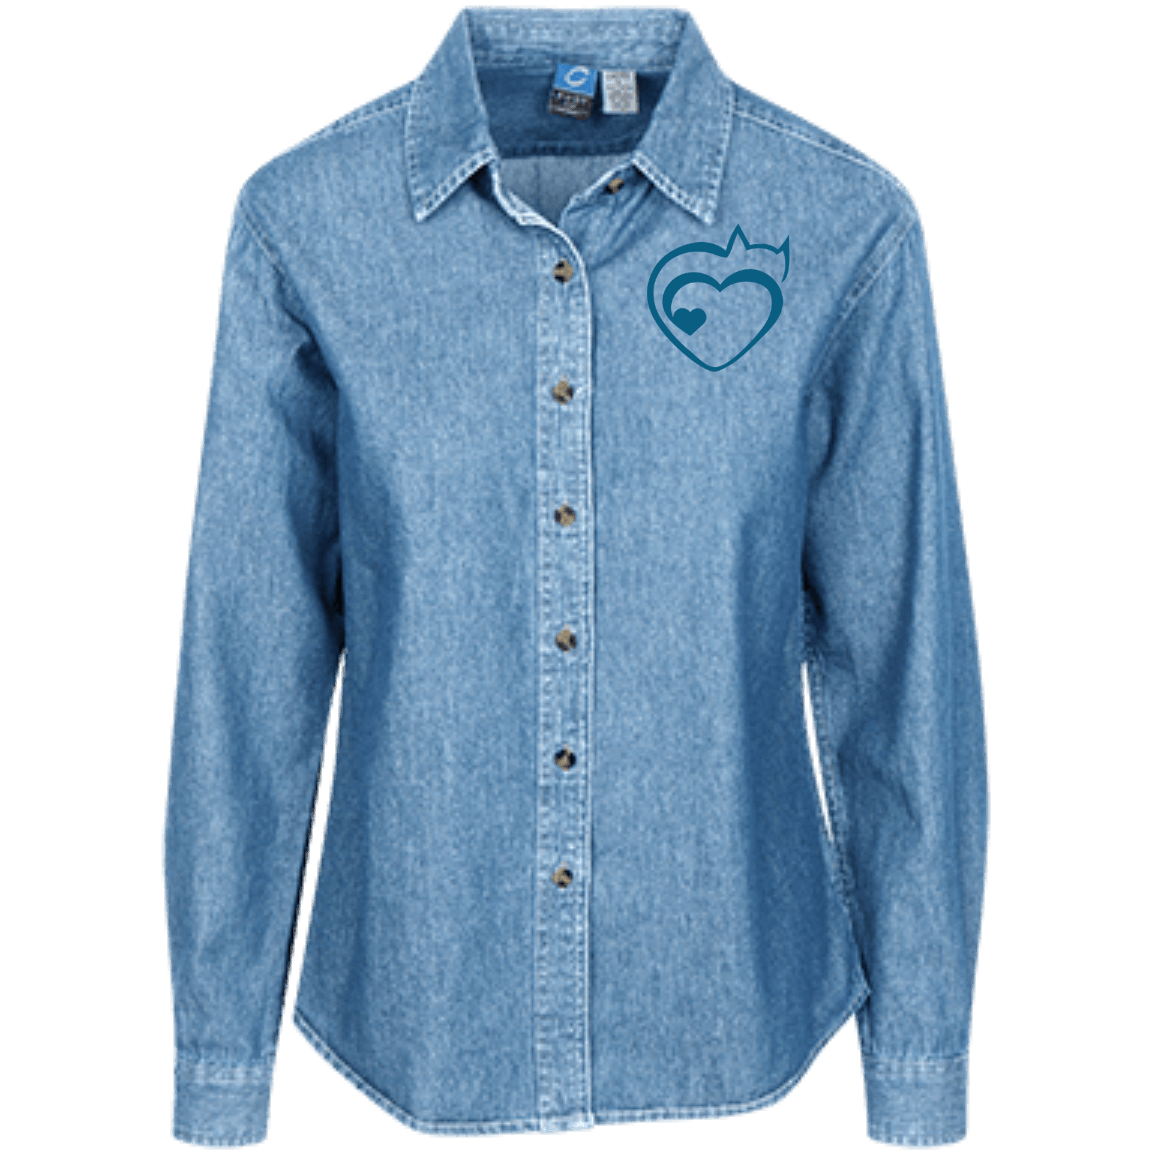 Designs by MyUtopia Shout Out:Cat Heart Embrodered Women's Long Sleeve Denim Shirt,Faded Blue / X-Small,Dress Shirts